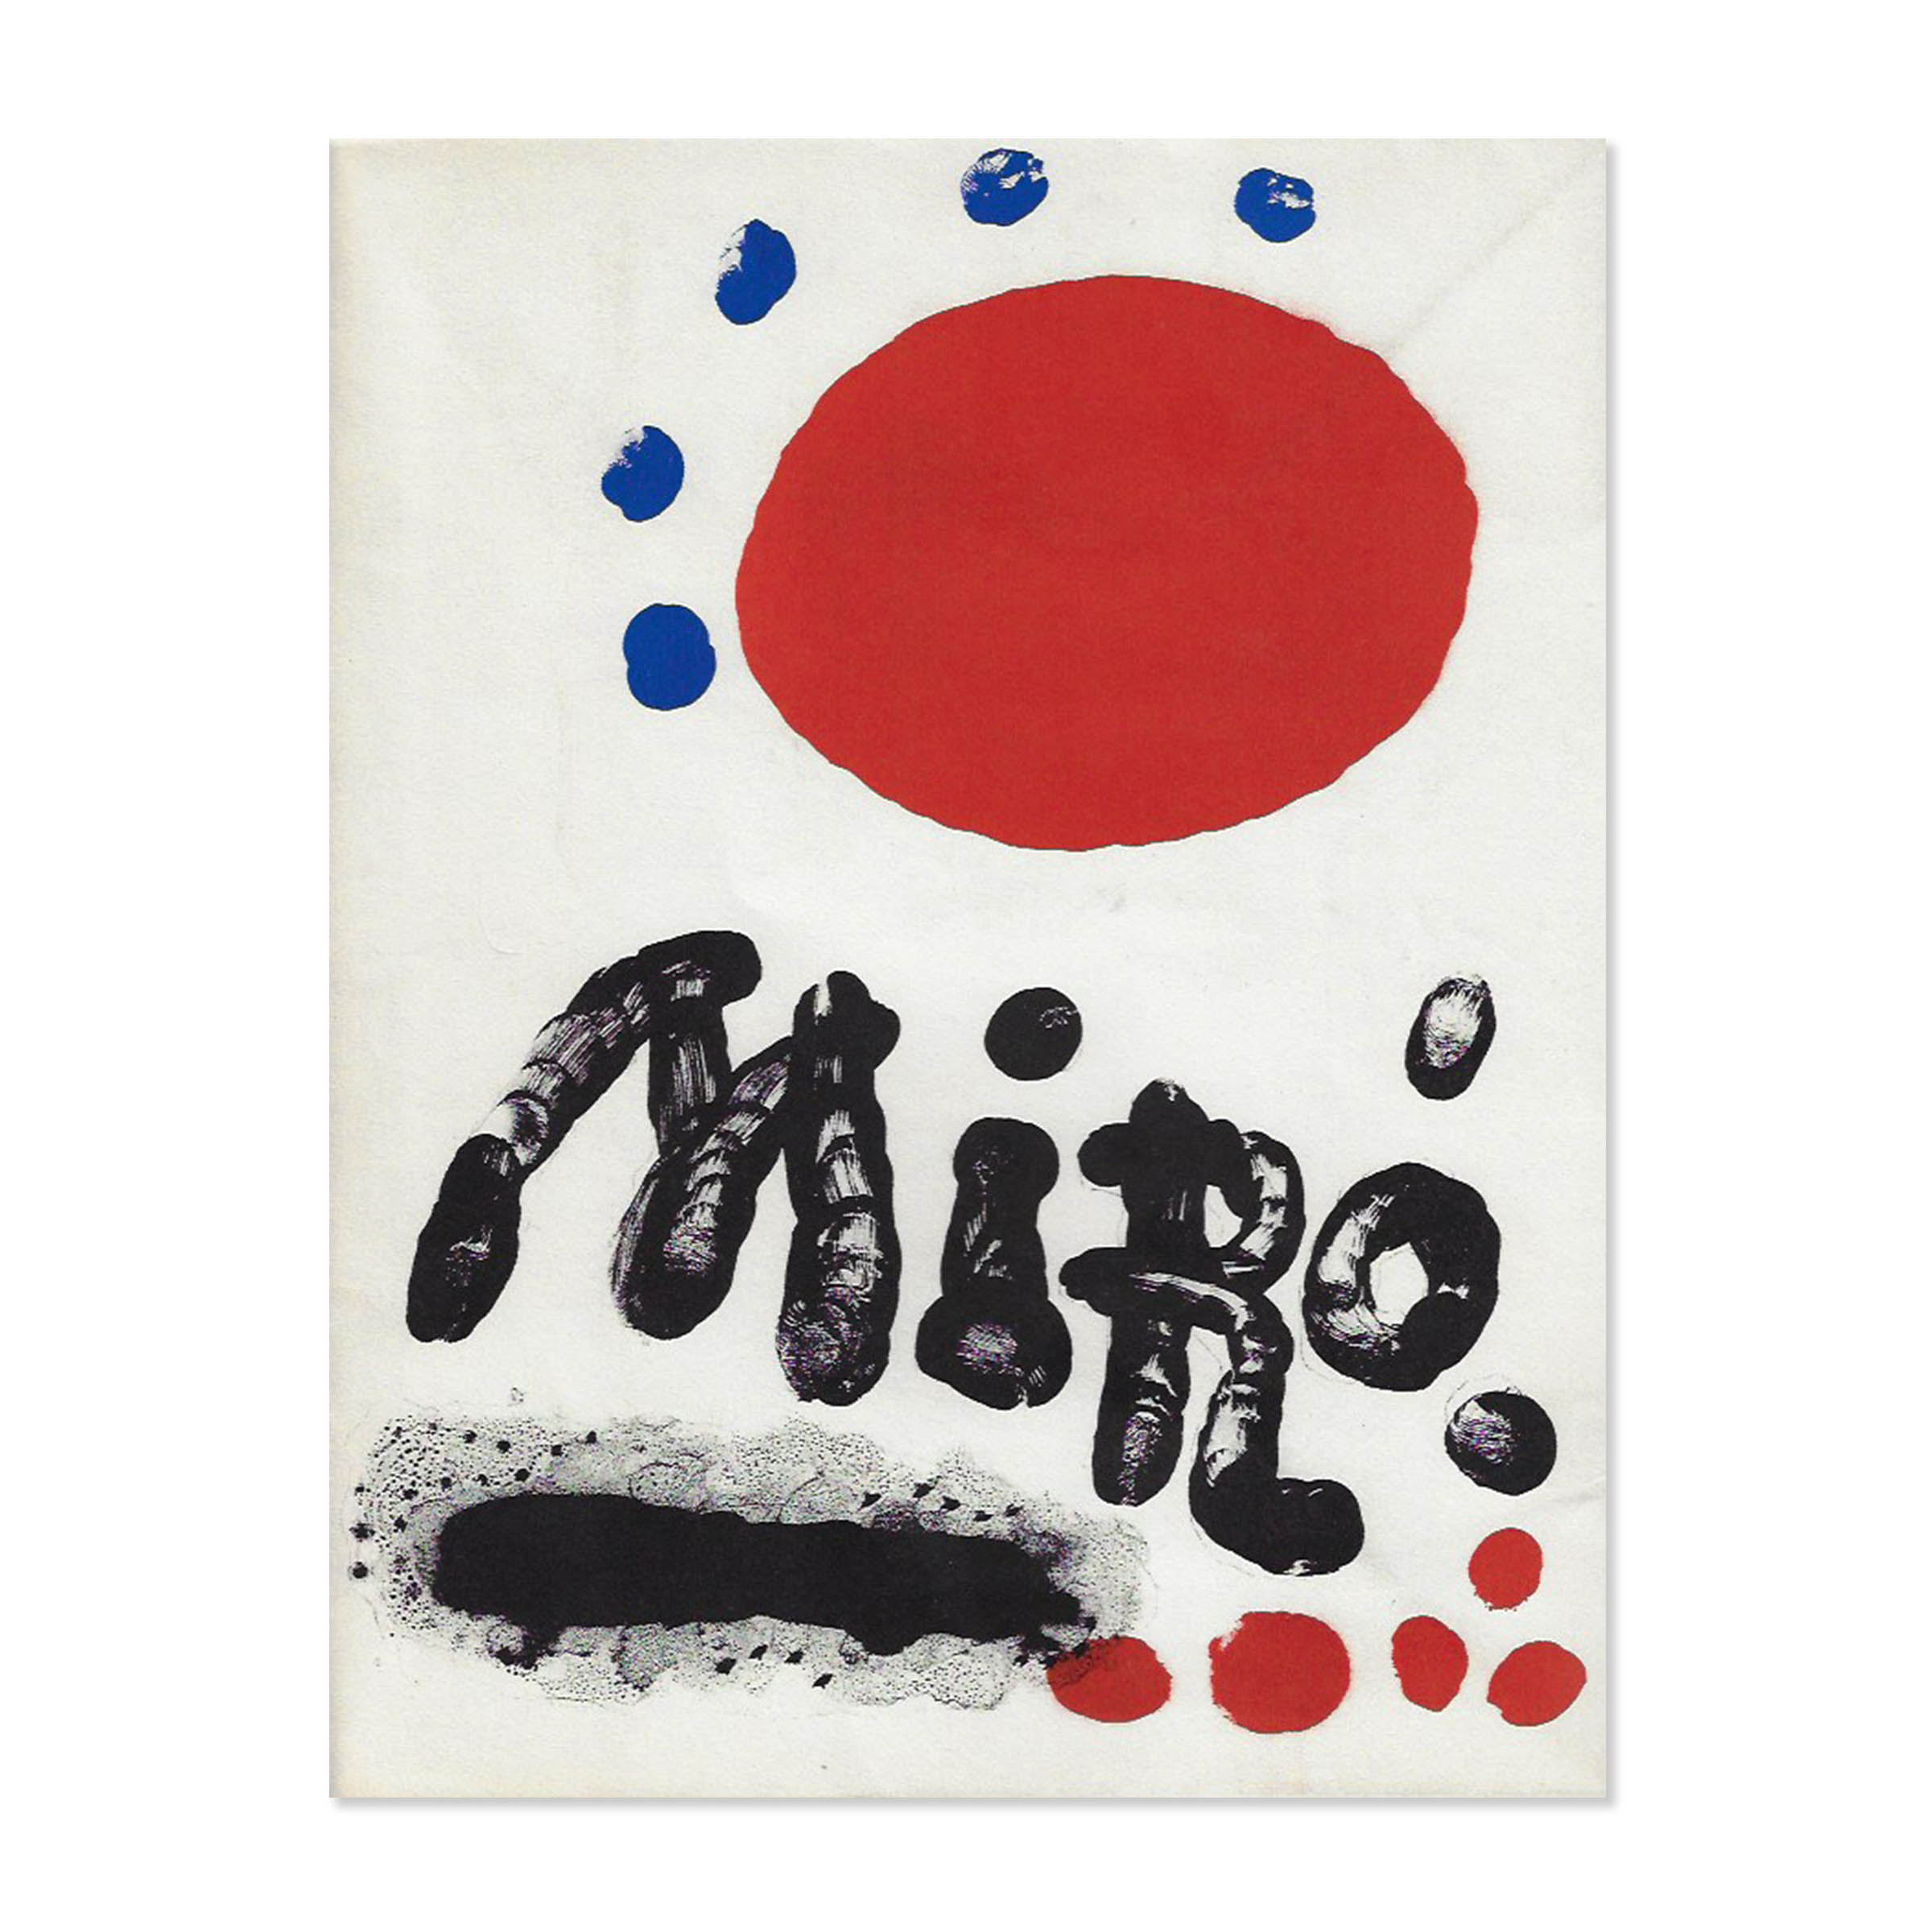 Miro Recent Paintings. Recto cover view